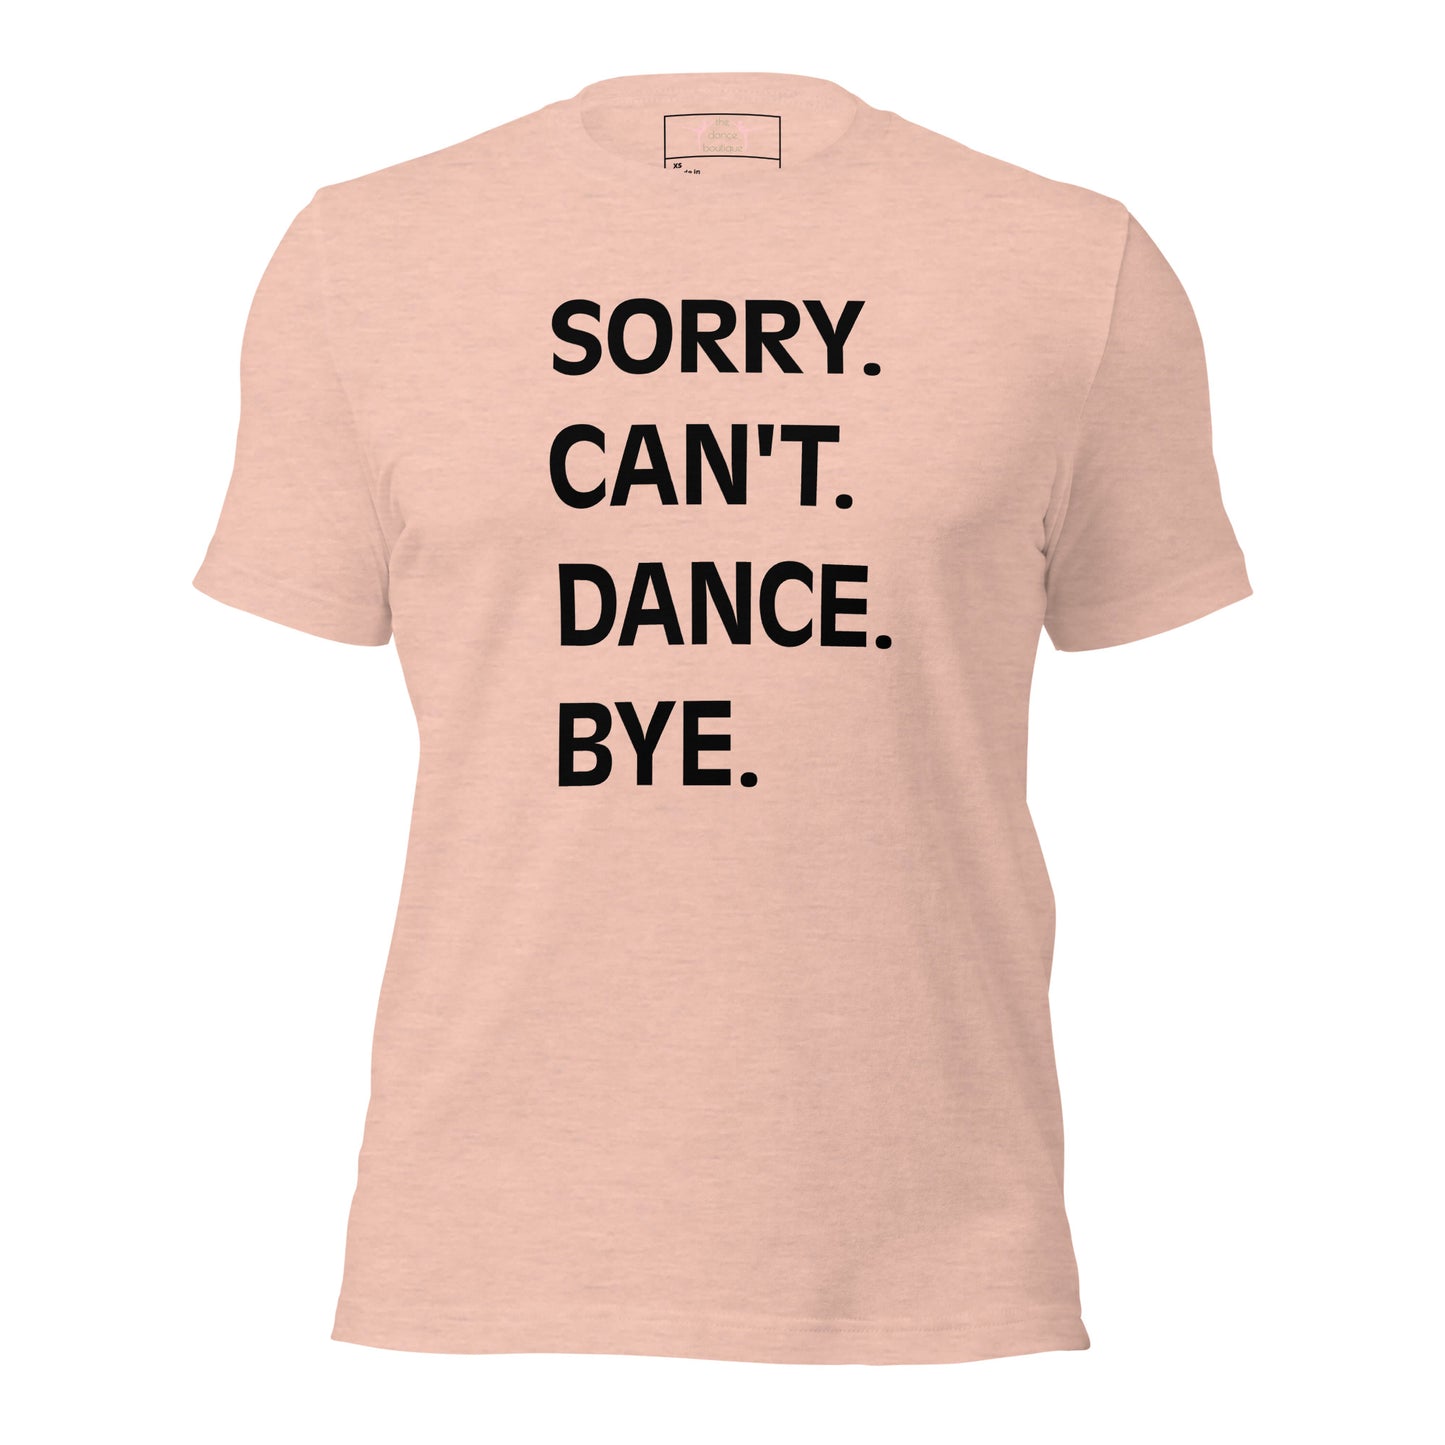 Adult "Sorry. Can't. Dance. Bye" Unisex t-shirt